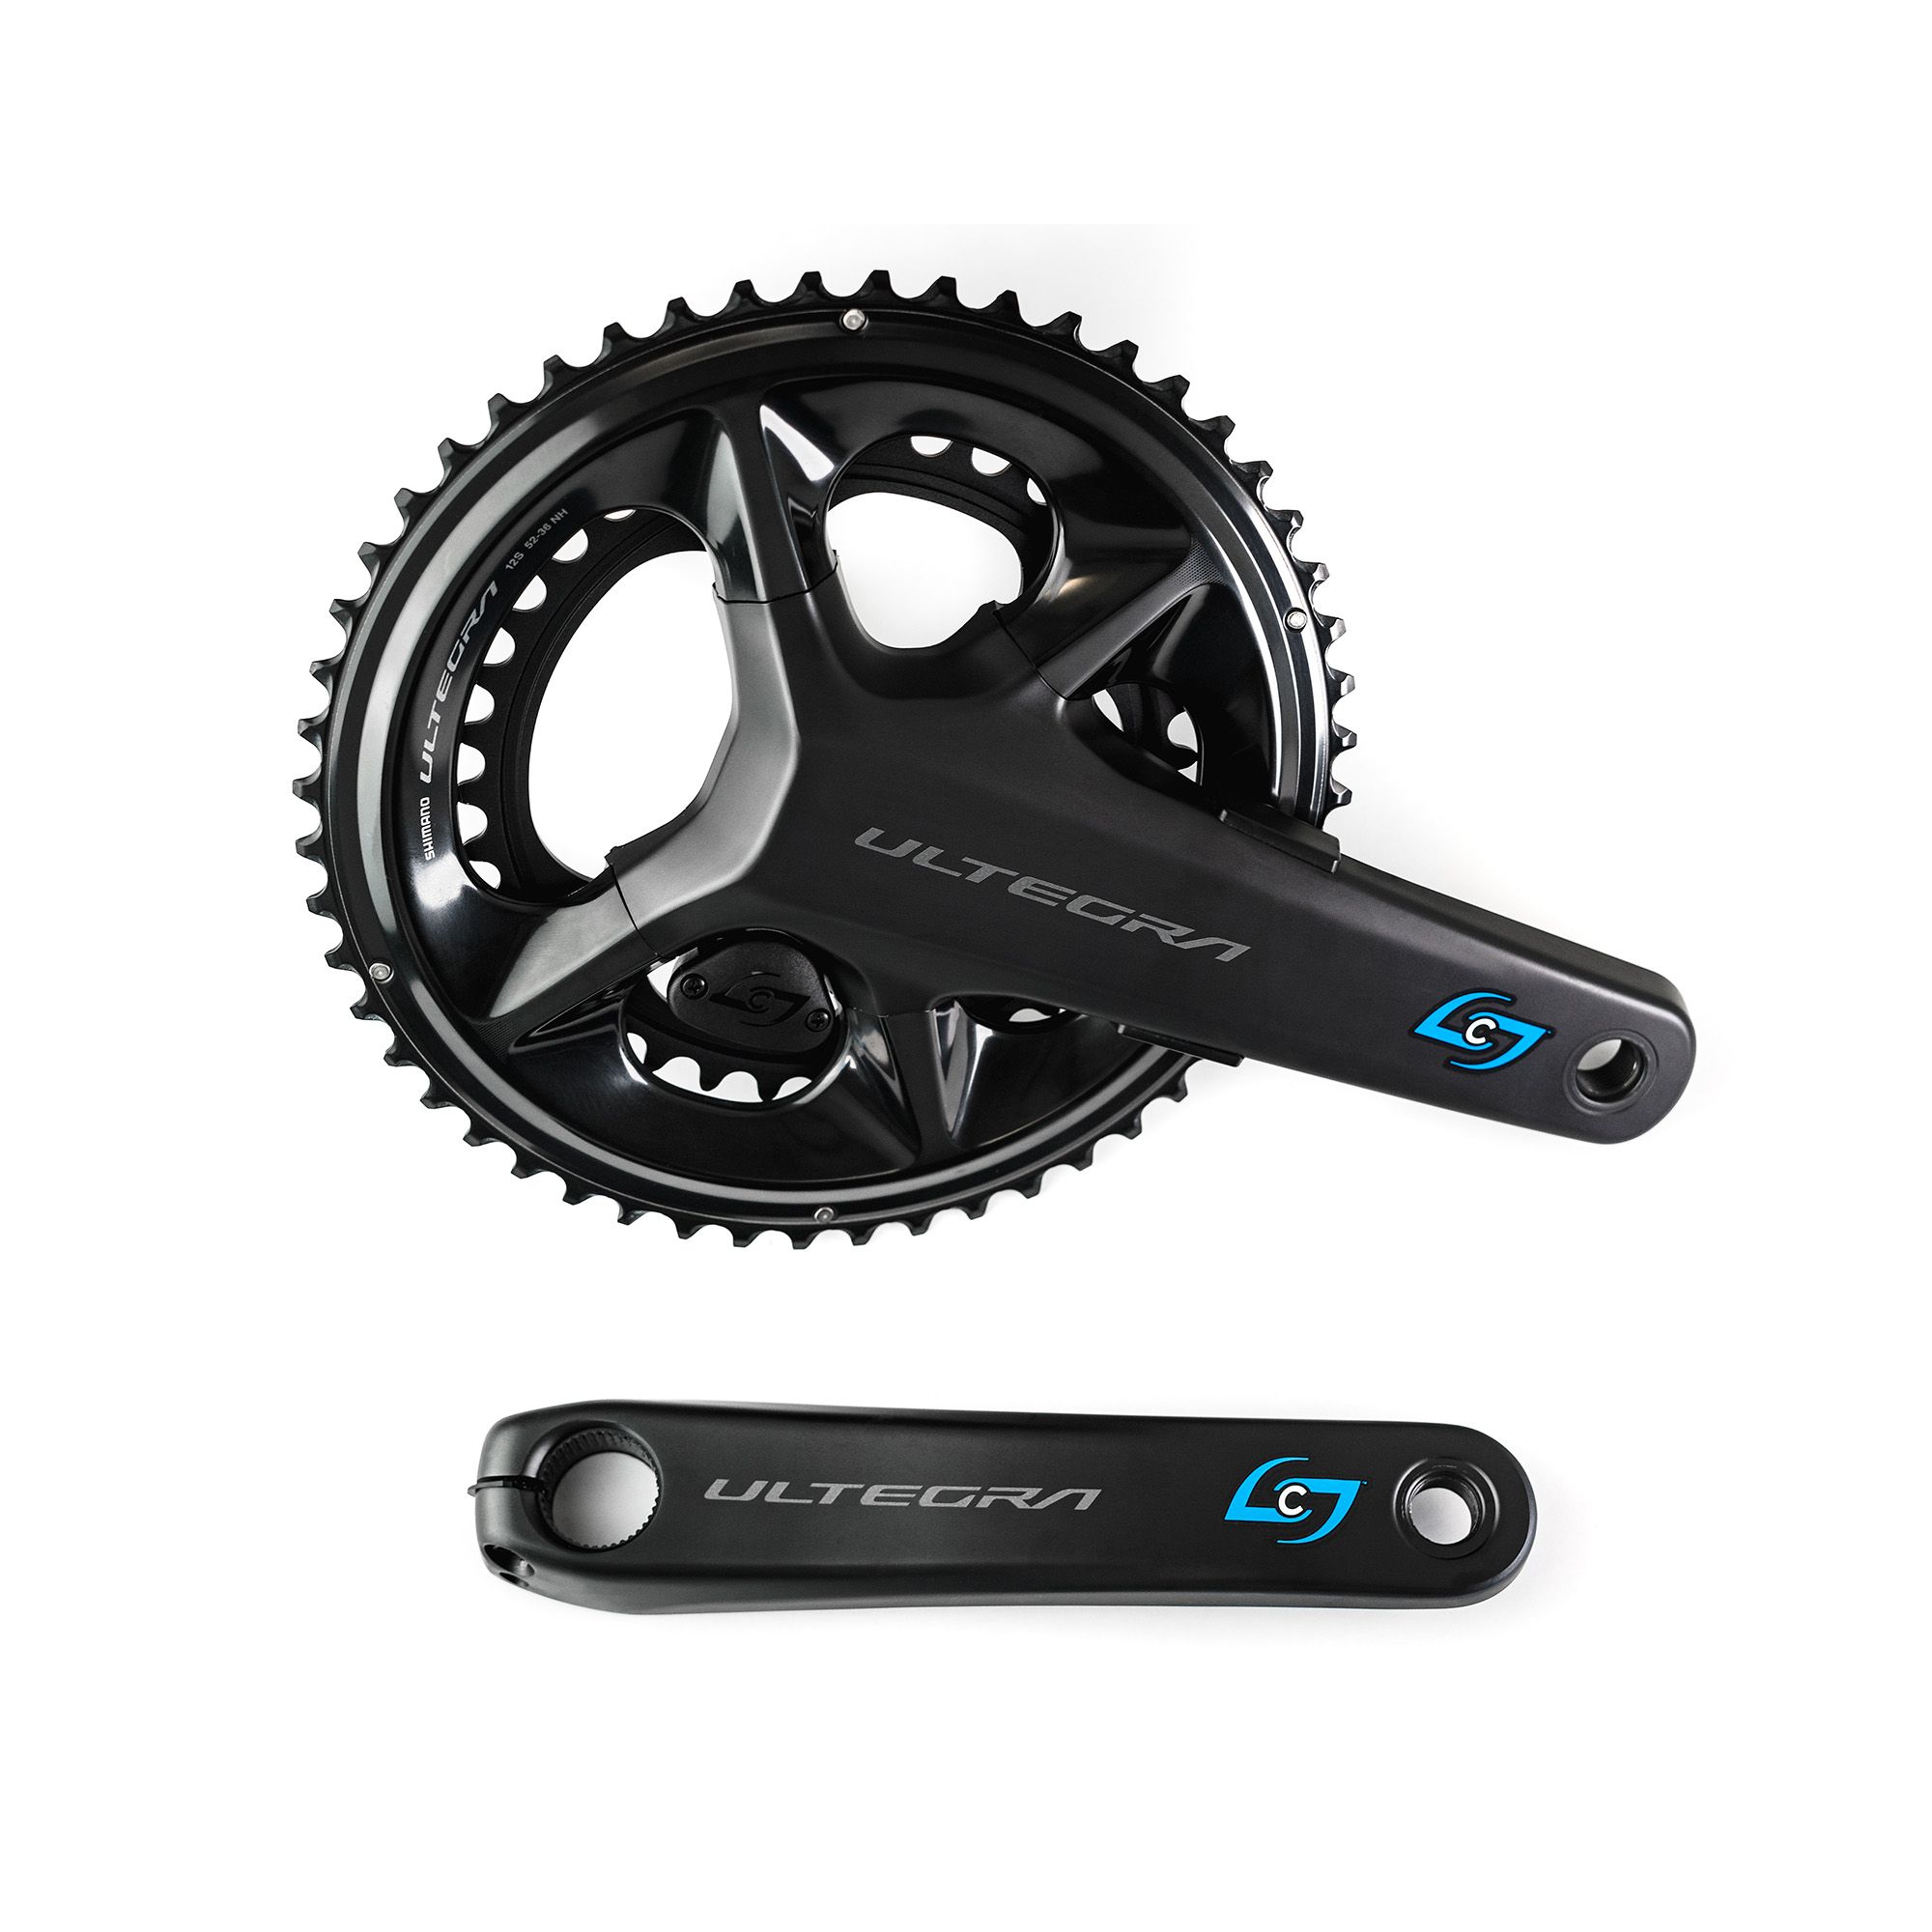 Stages Power LR Shimano Ultegra R8100 Dual Sided Power Meter